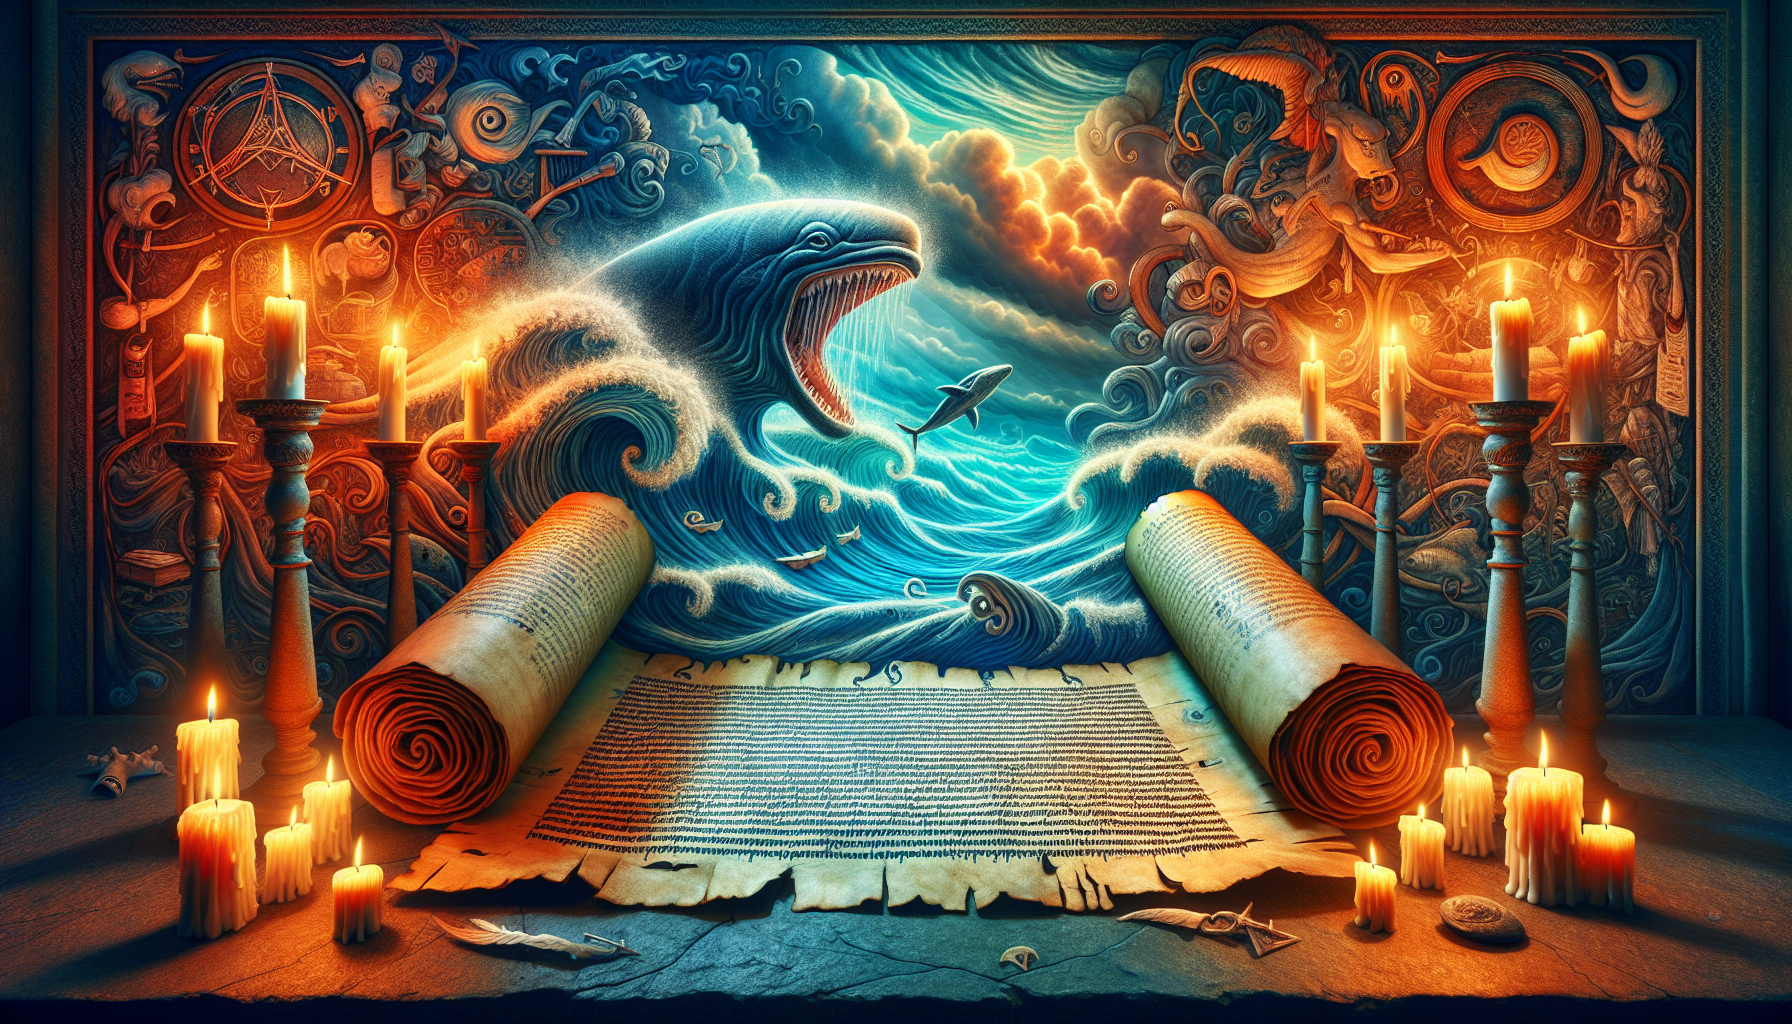 An ancient, weathered scroll unfurled on a stone altar, illuminated by flickering candlelight. Surrounding the scroll are mystical symbols and oceanic elements such as swirling waves and a whale, repr